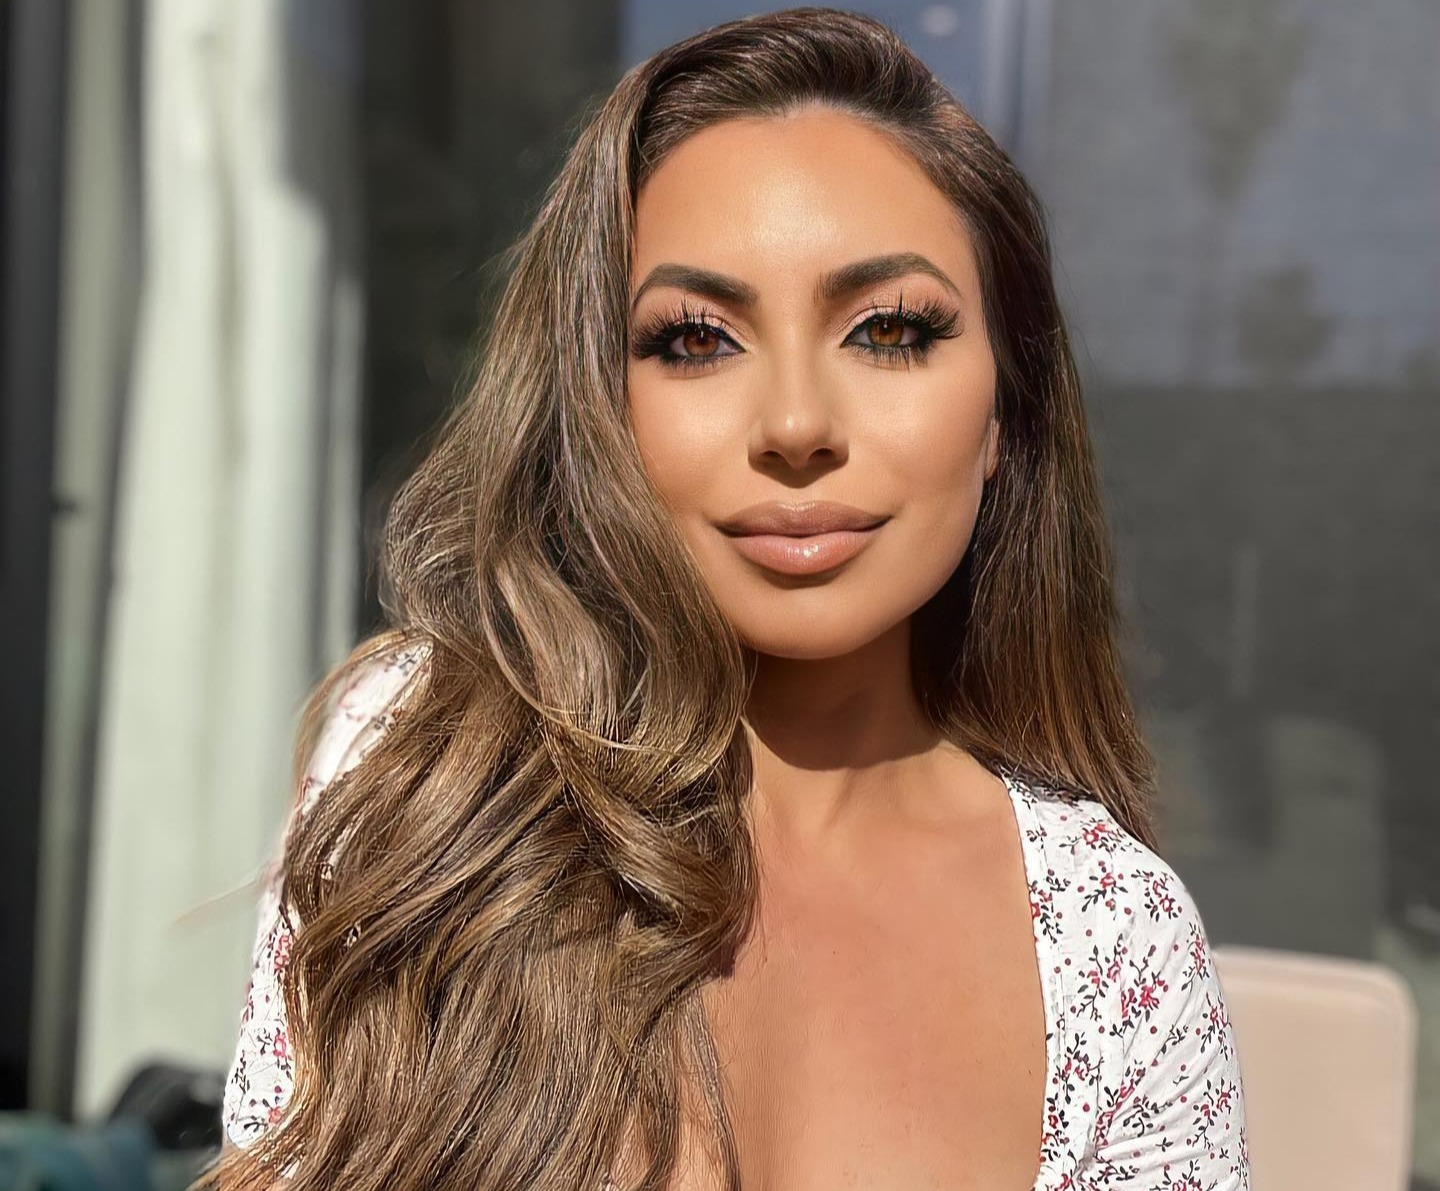 baba robinson recommends Uldouz Wallace Sextape